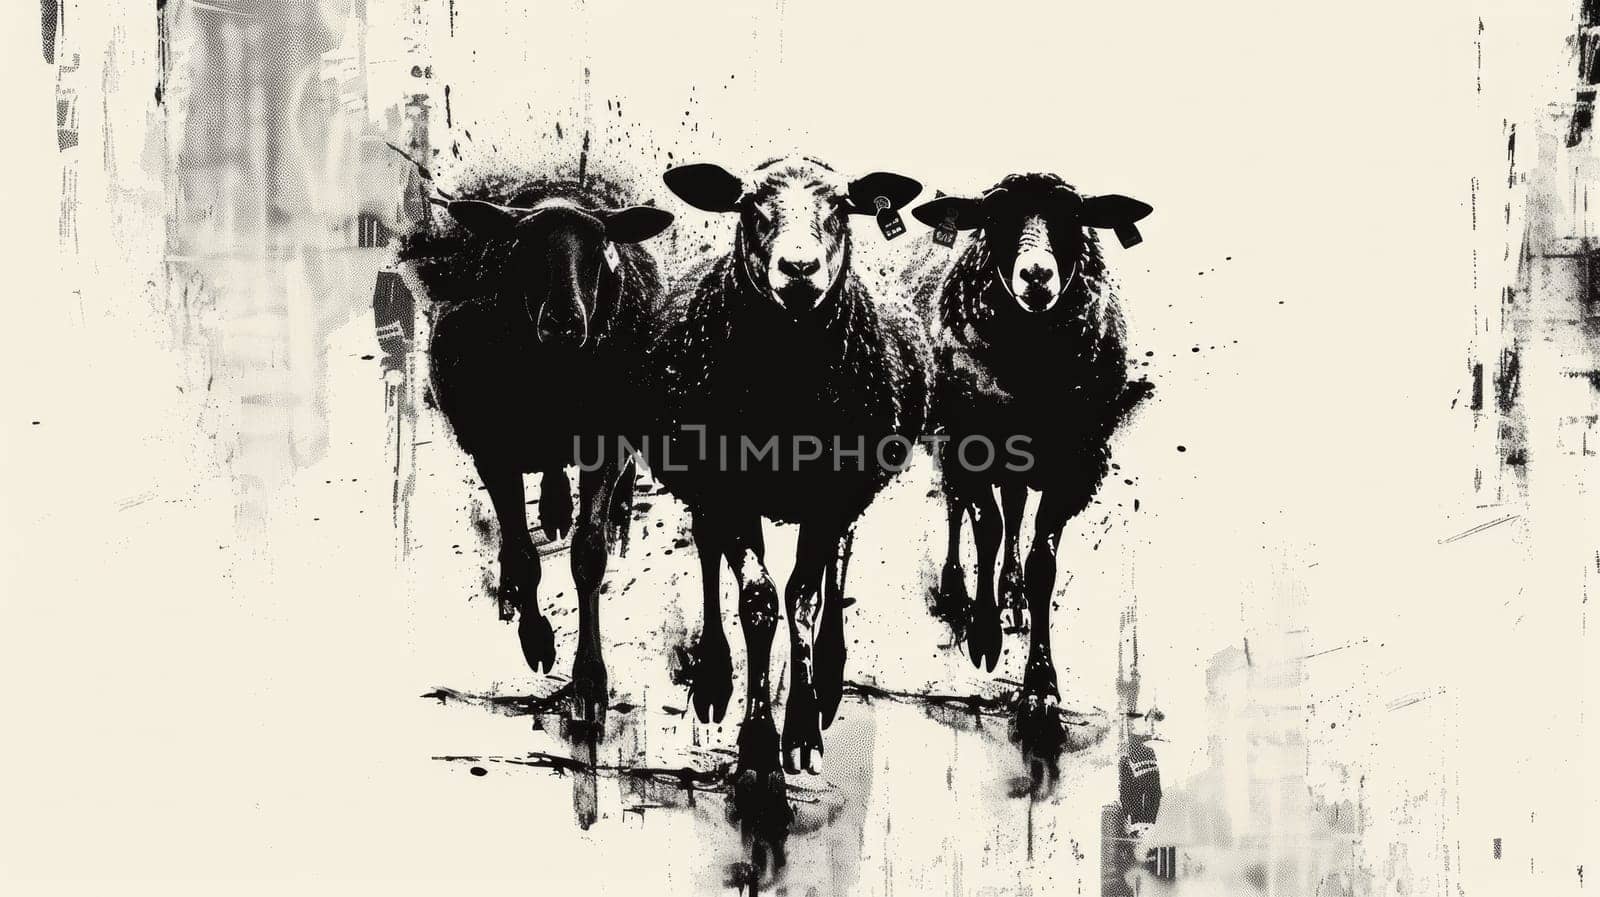 A black and white painting of three sheep walking down a road